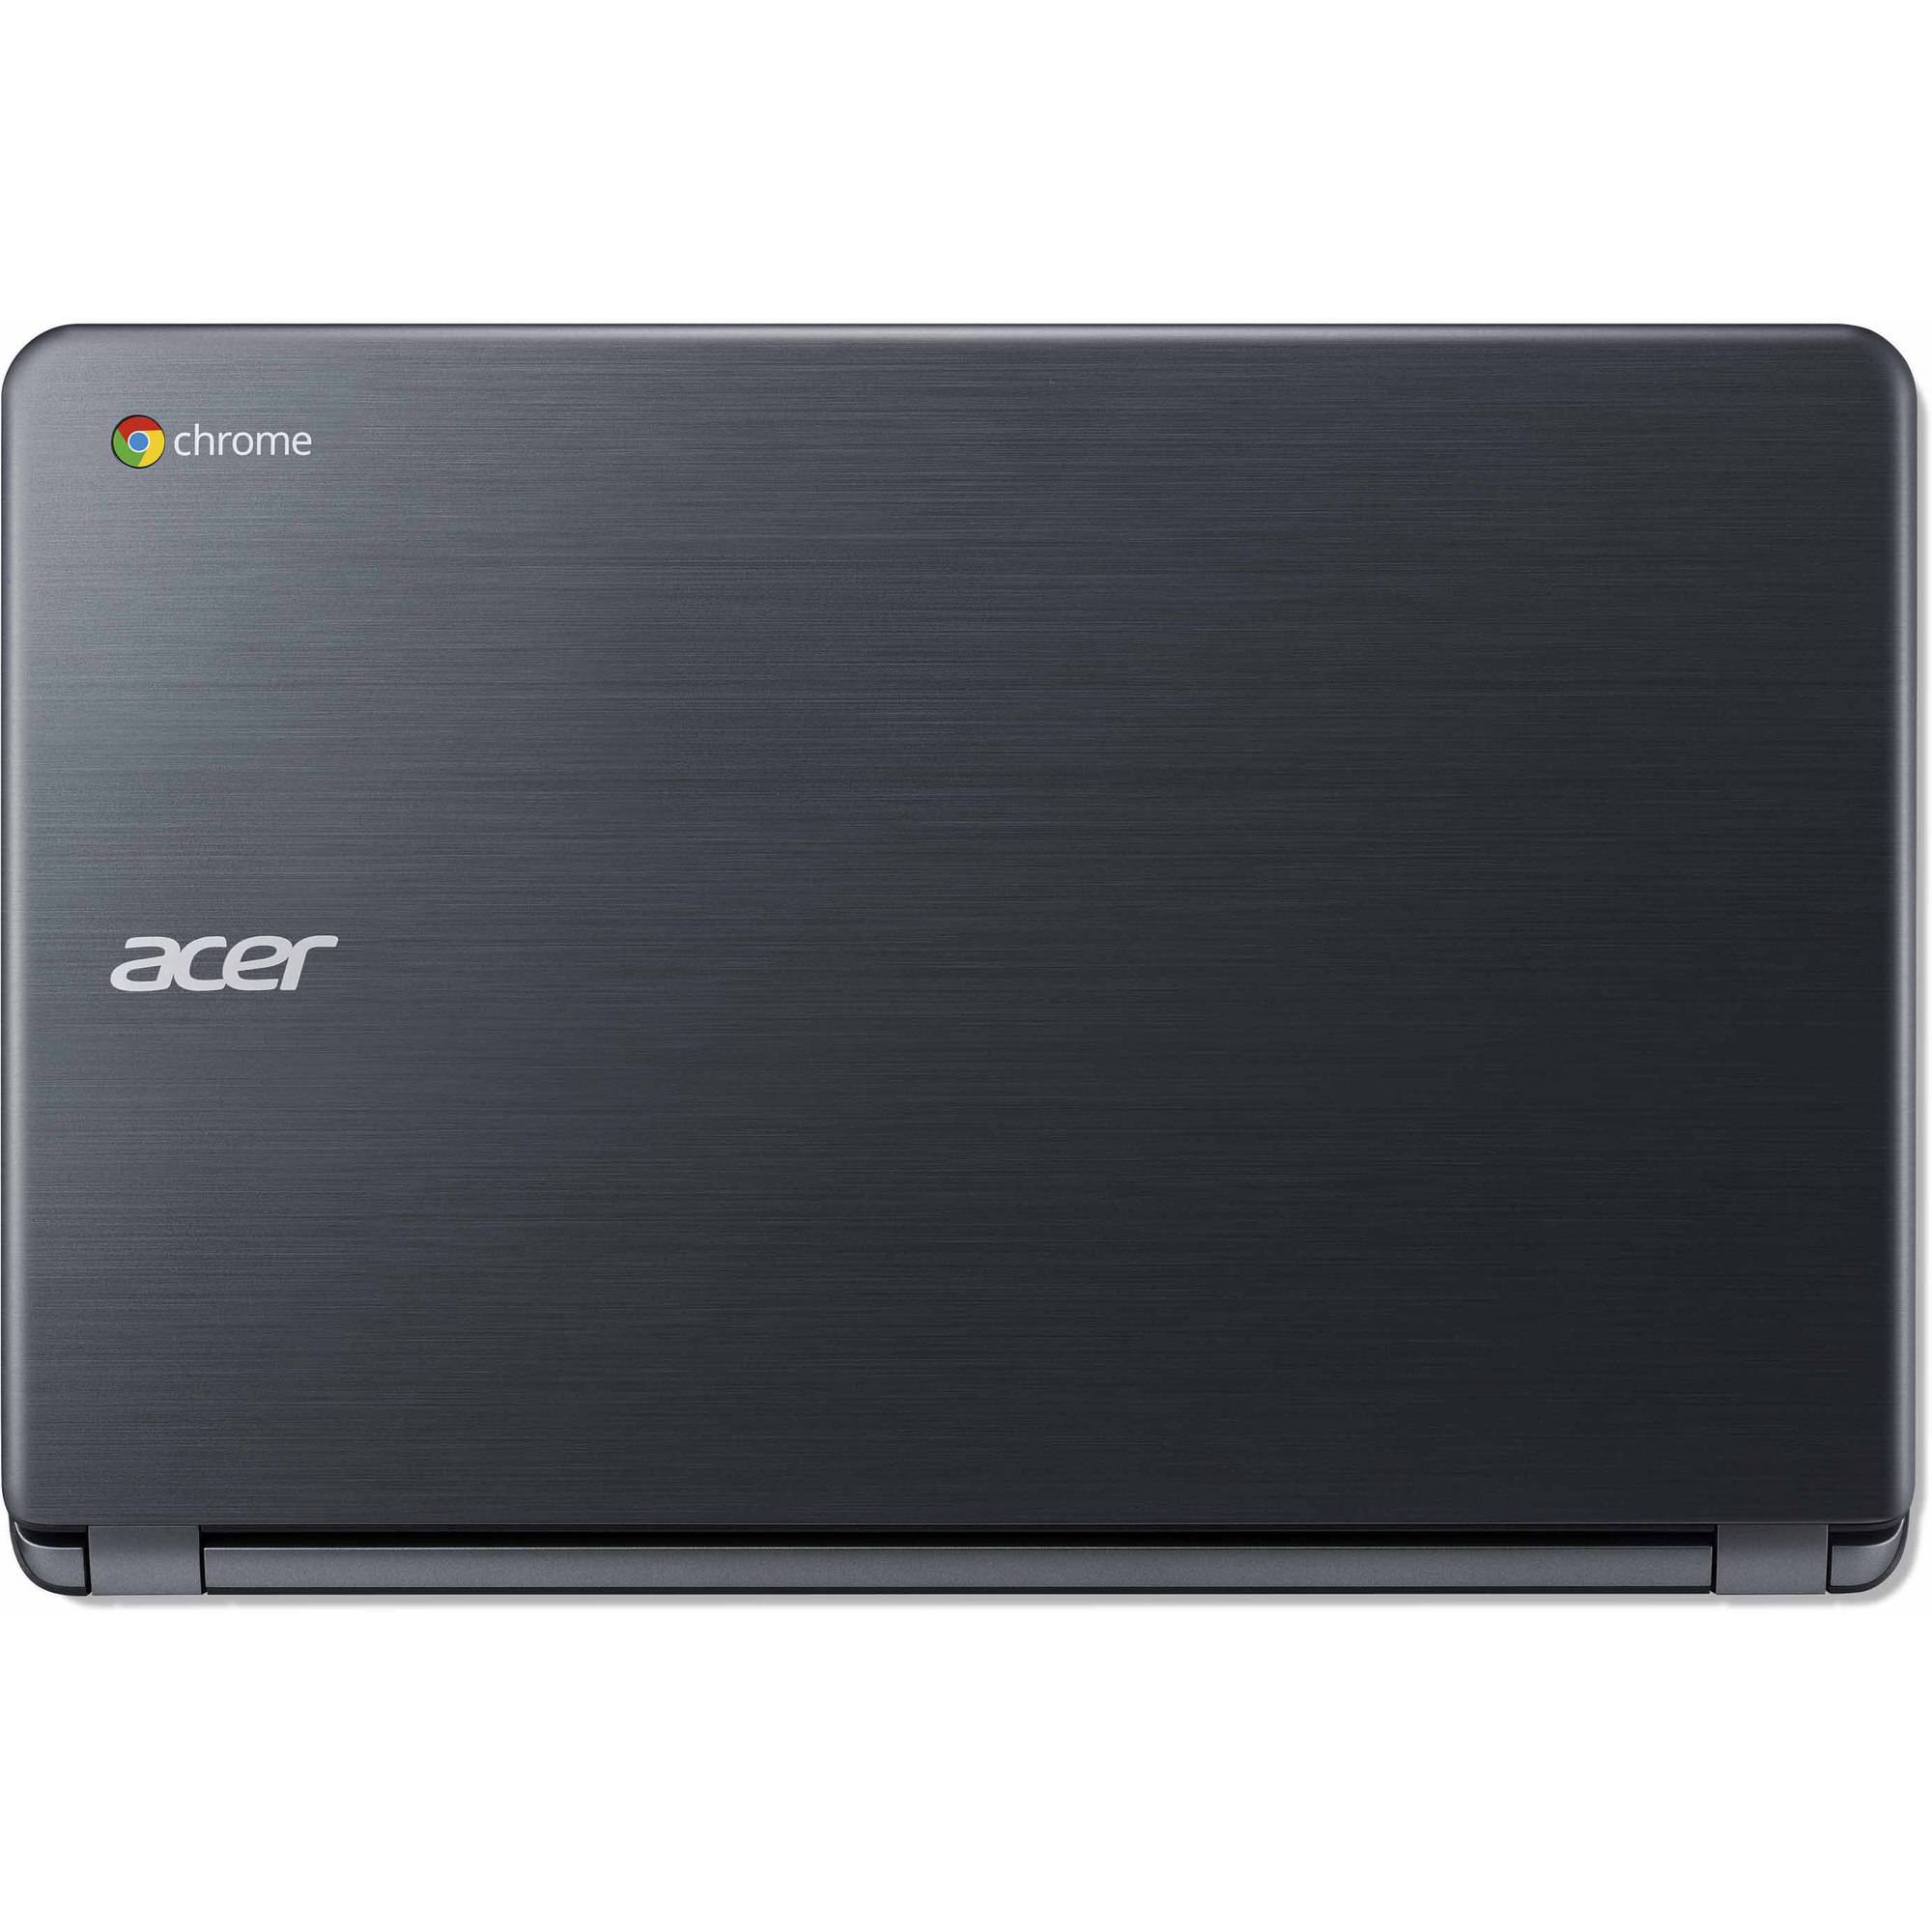 Acer Granite Gray 15.6" CB3-531-C4A5 Chromebook PC with Intel Celeron N2830 Dual-Core Processor, 2GB Memory, 16GB Hard Drive and Chrome OS - image 3 of 9